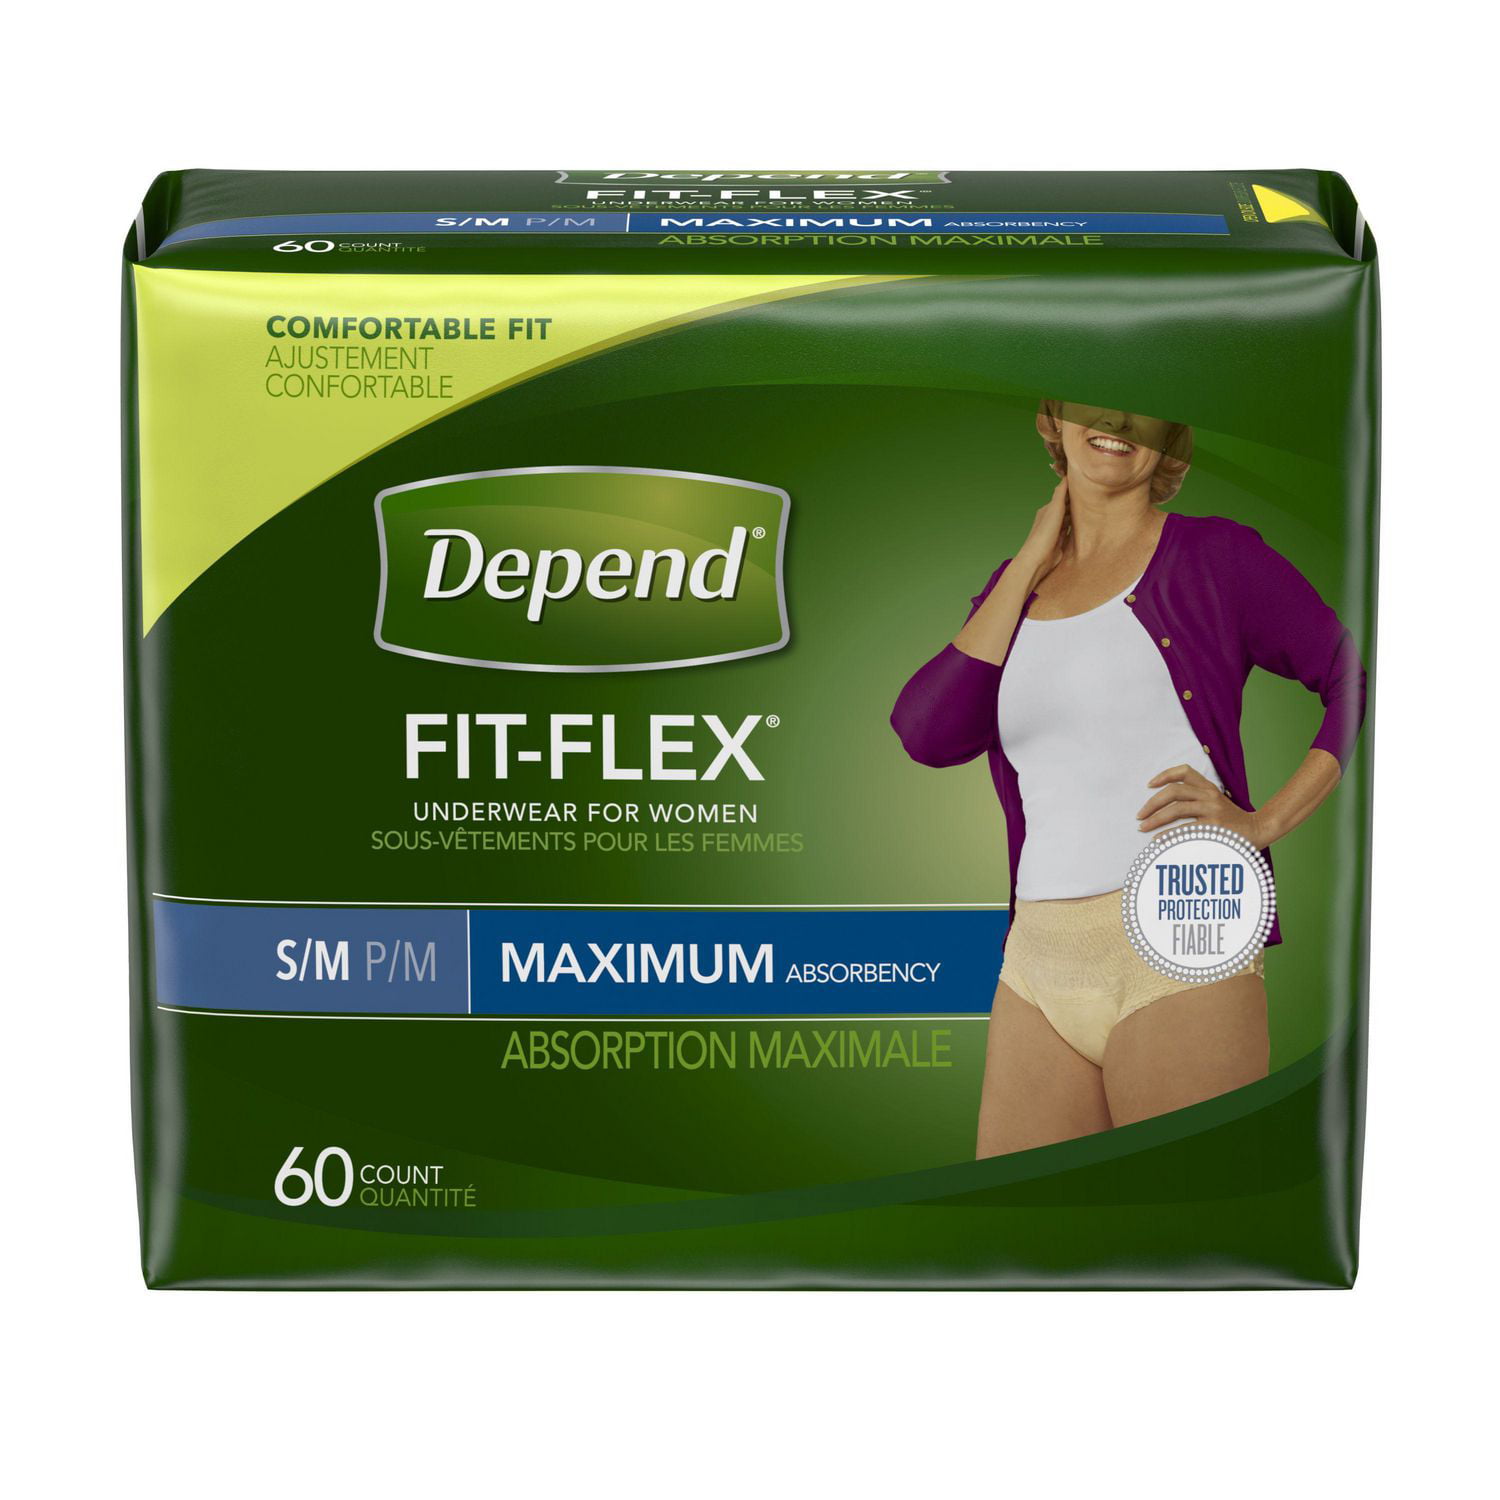 Women's Protective Underwear Max Absorbency  Basics Size Med